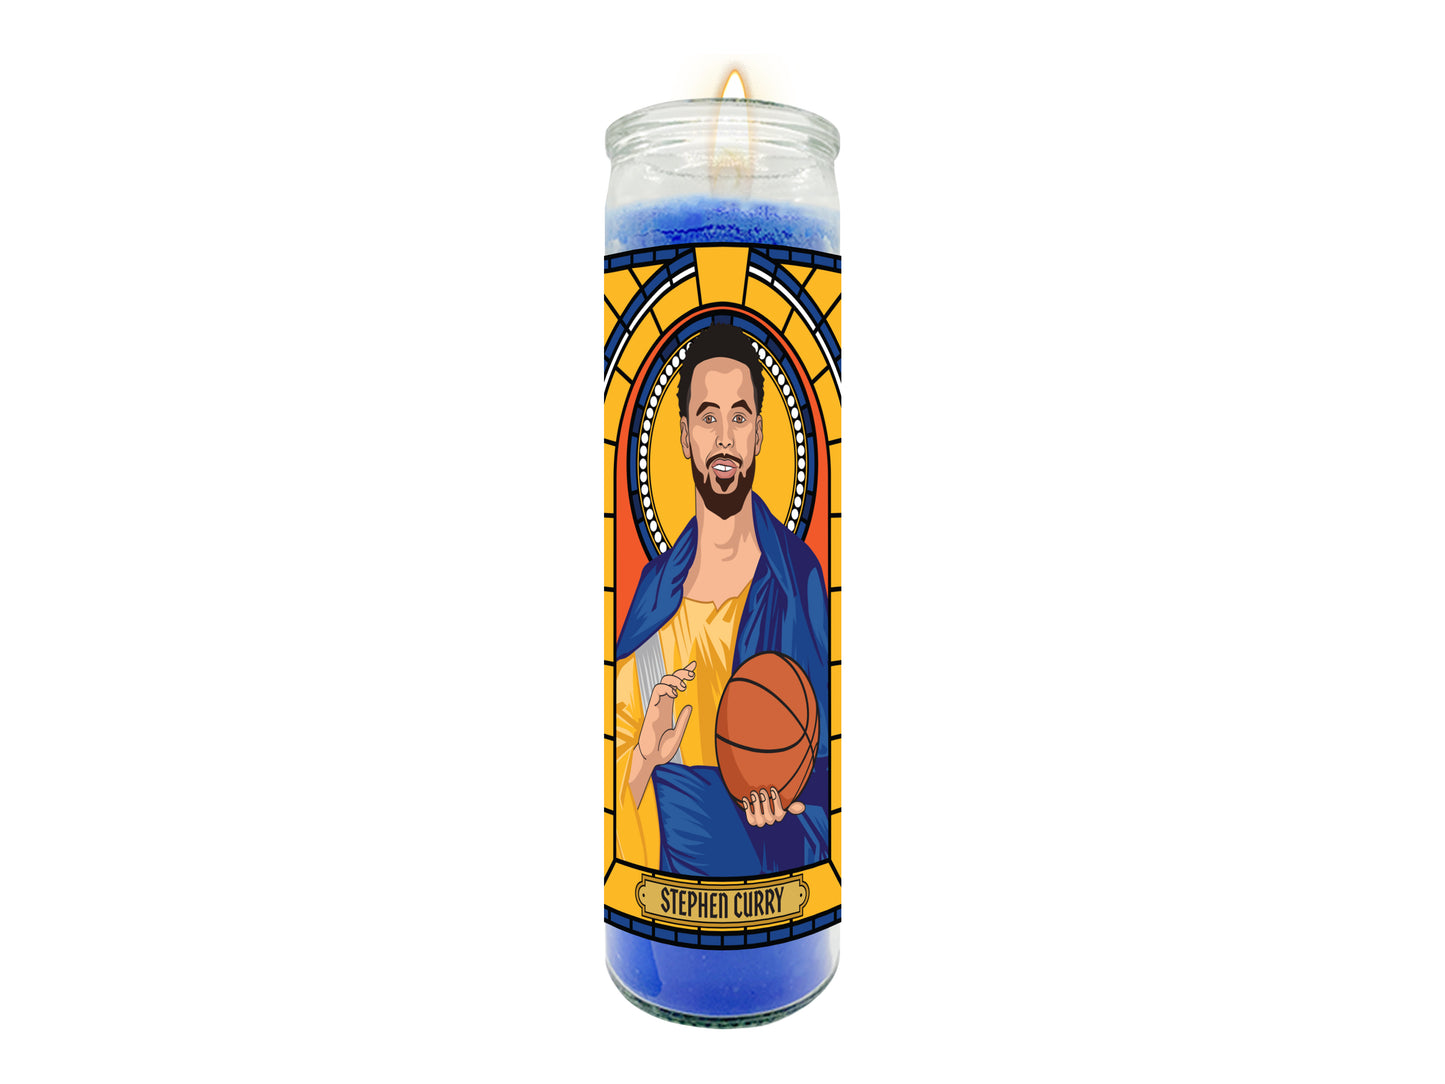 Stephen Curry Illustrated Prayer Candle